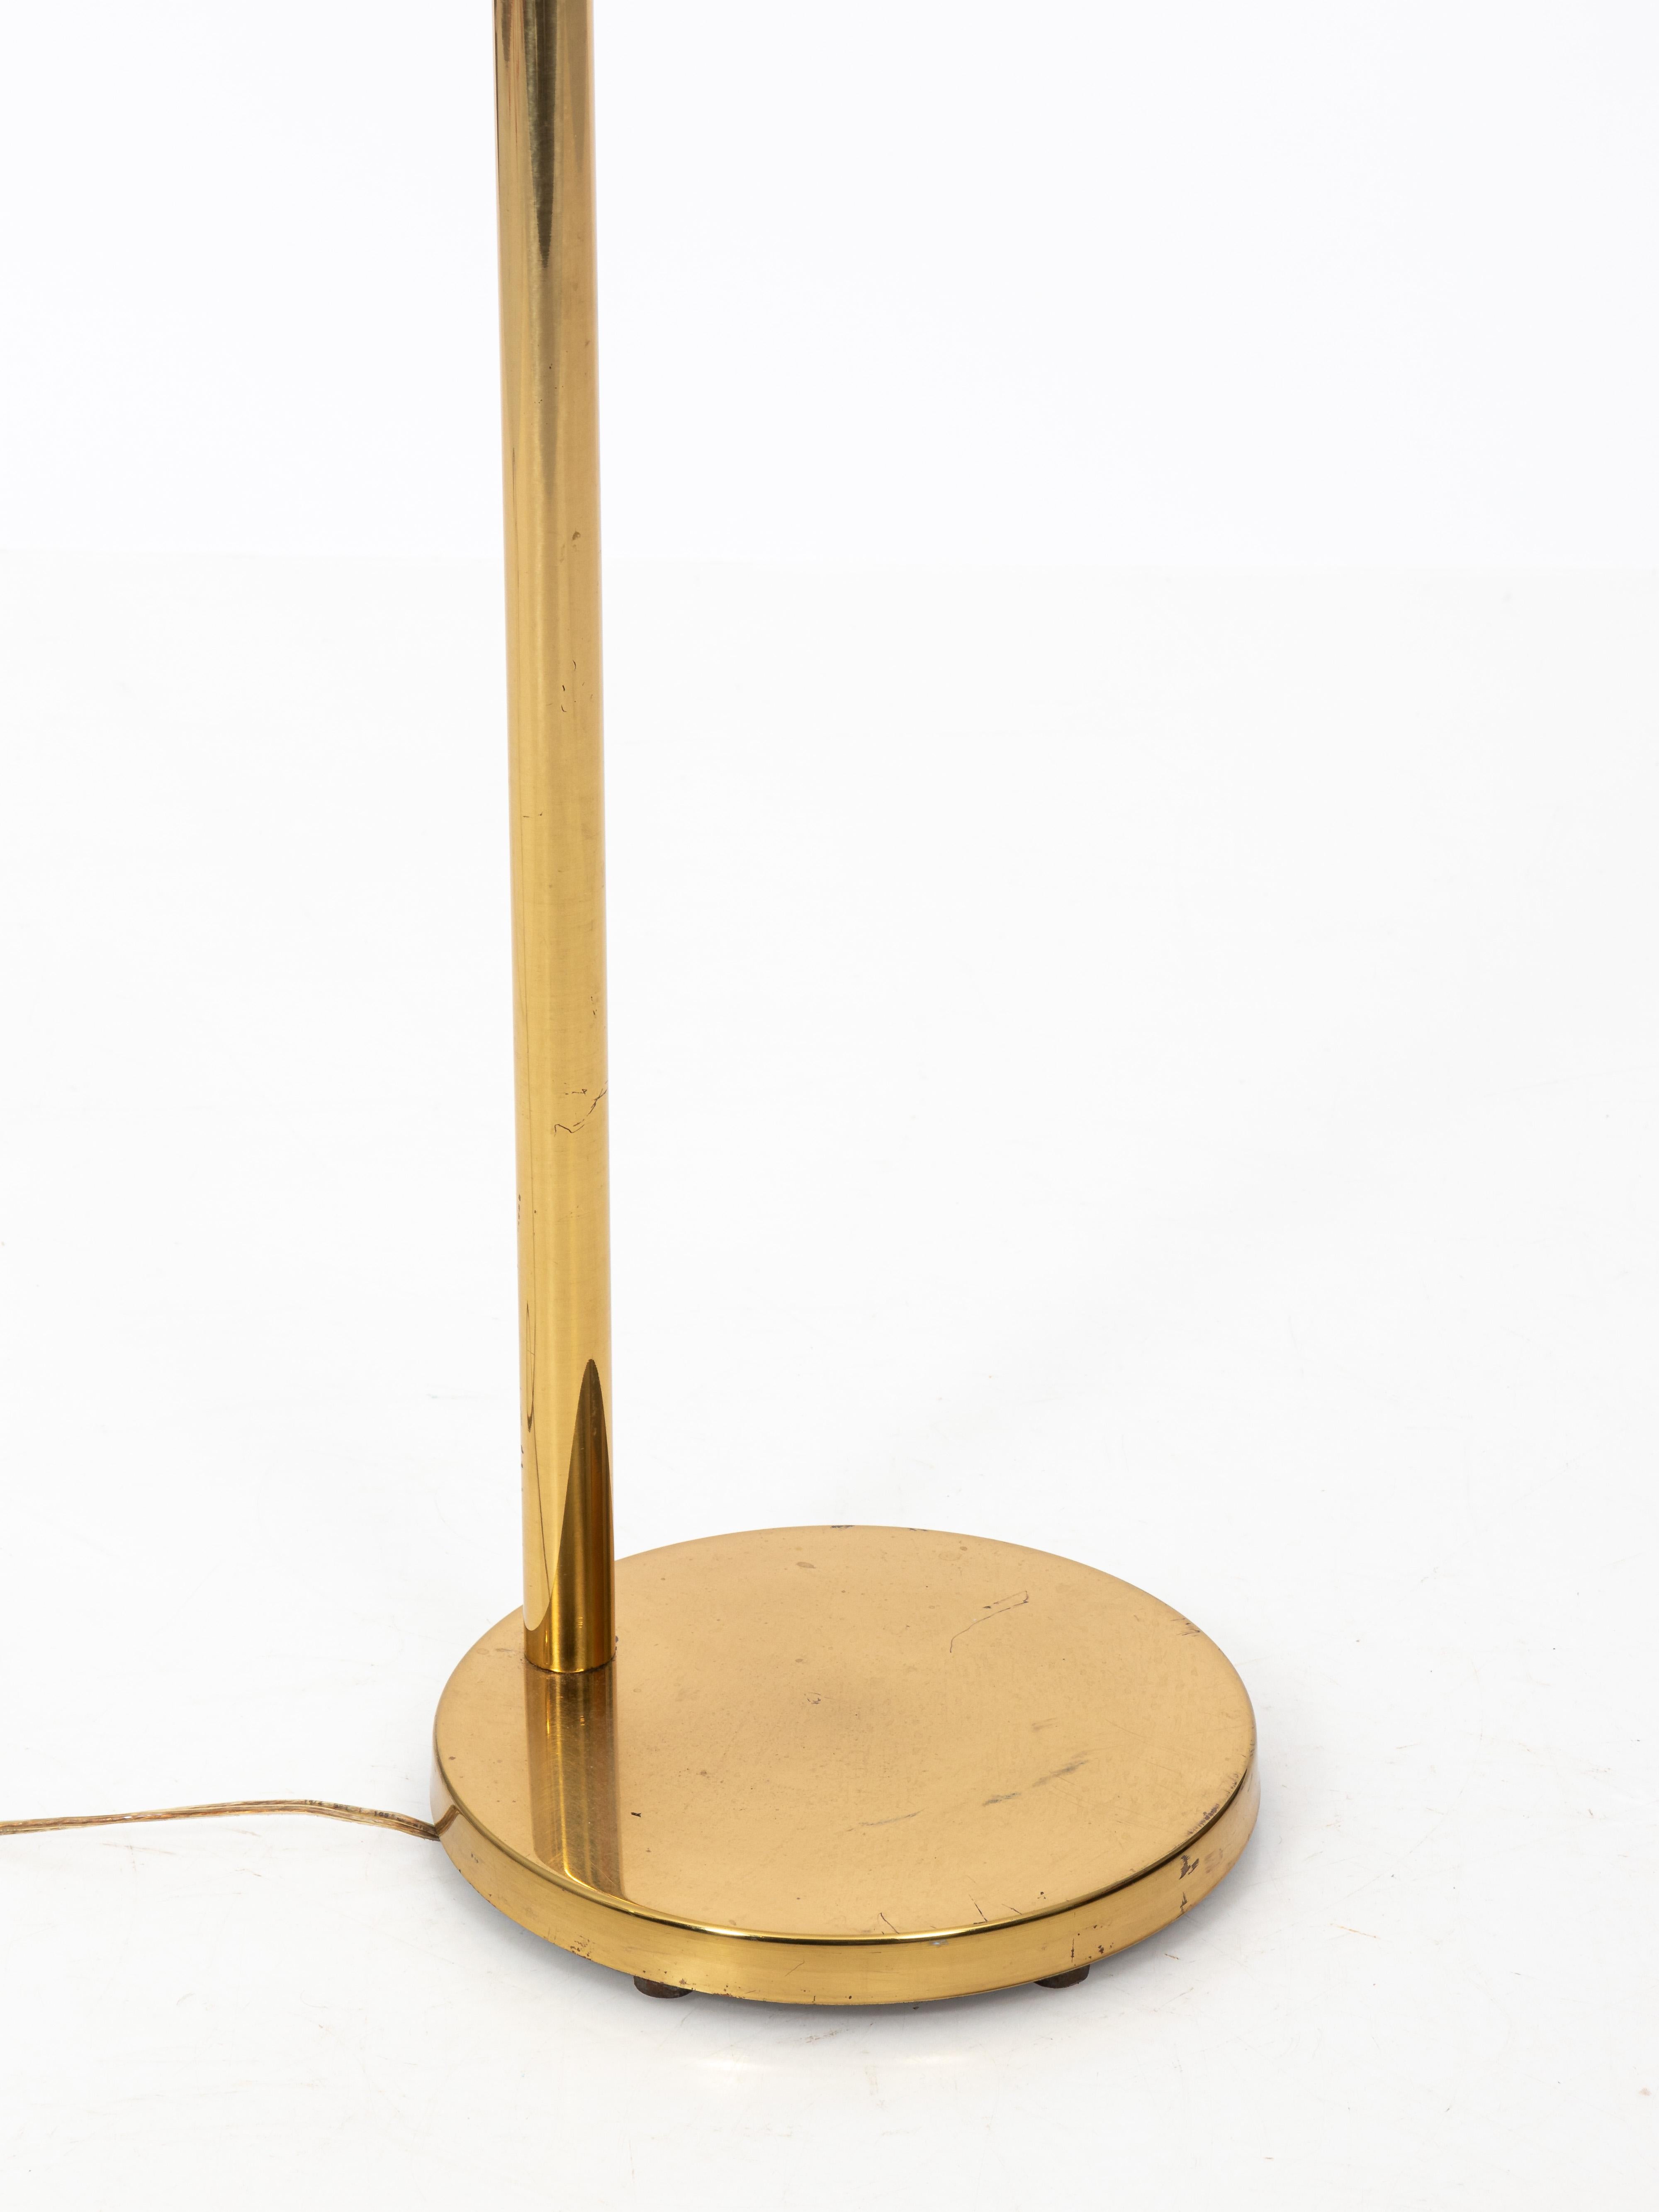 Brass floor lamp by Koch & Lowy with original patina and maker's mark, circa 1960s. The lamp features adjustable height a nd DIM-able light. Made in the United States. Can be boxed and shipped through UPS. Price depends on location.